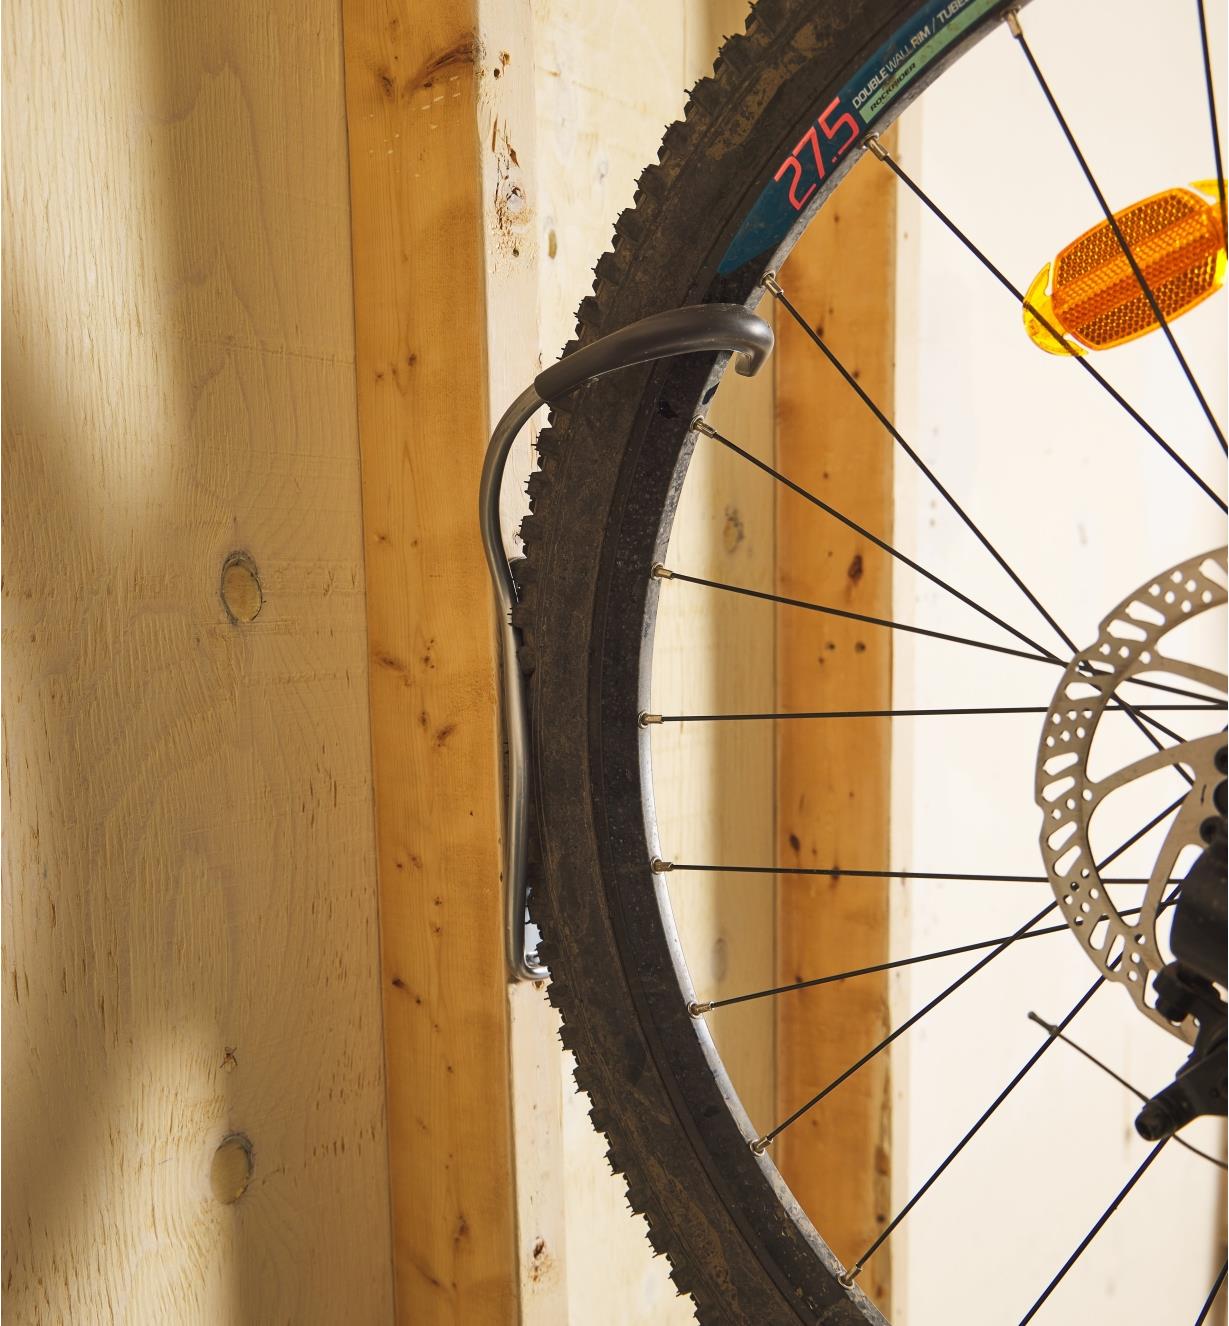 A bicycle tire attached to a rack on a wall